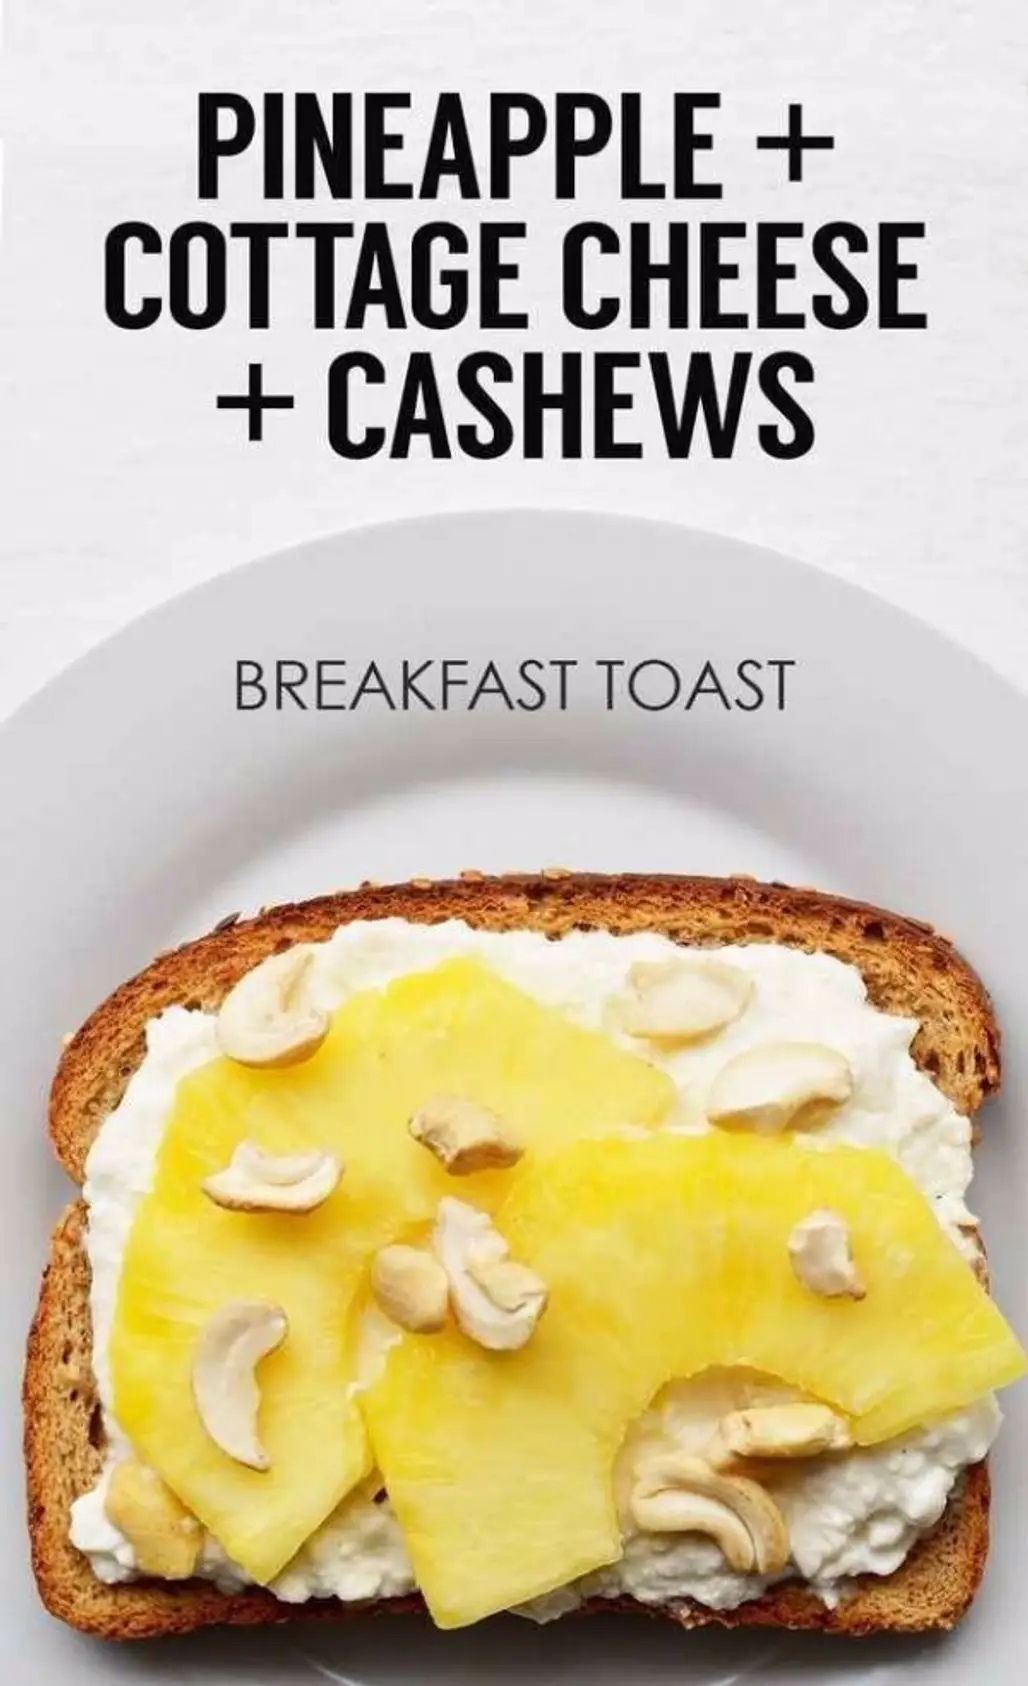 Sliced Pineapple Cottage Cheese and Cashews on Toast